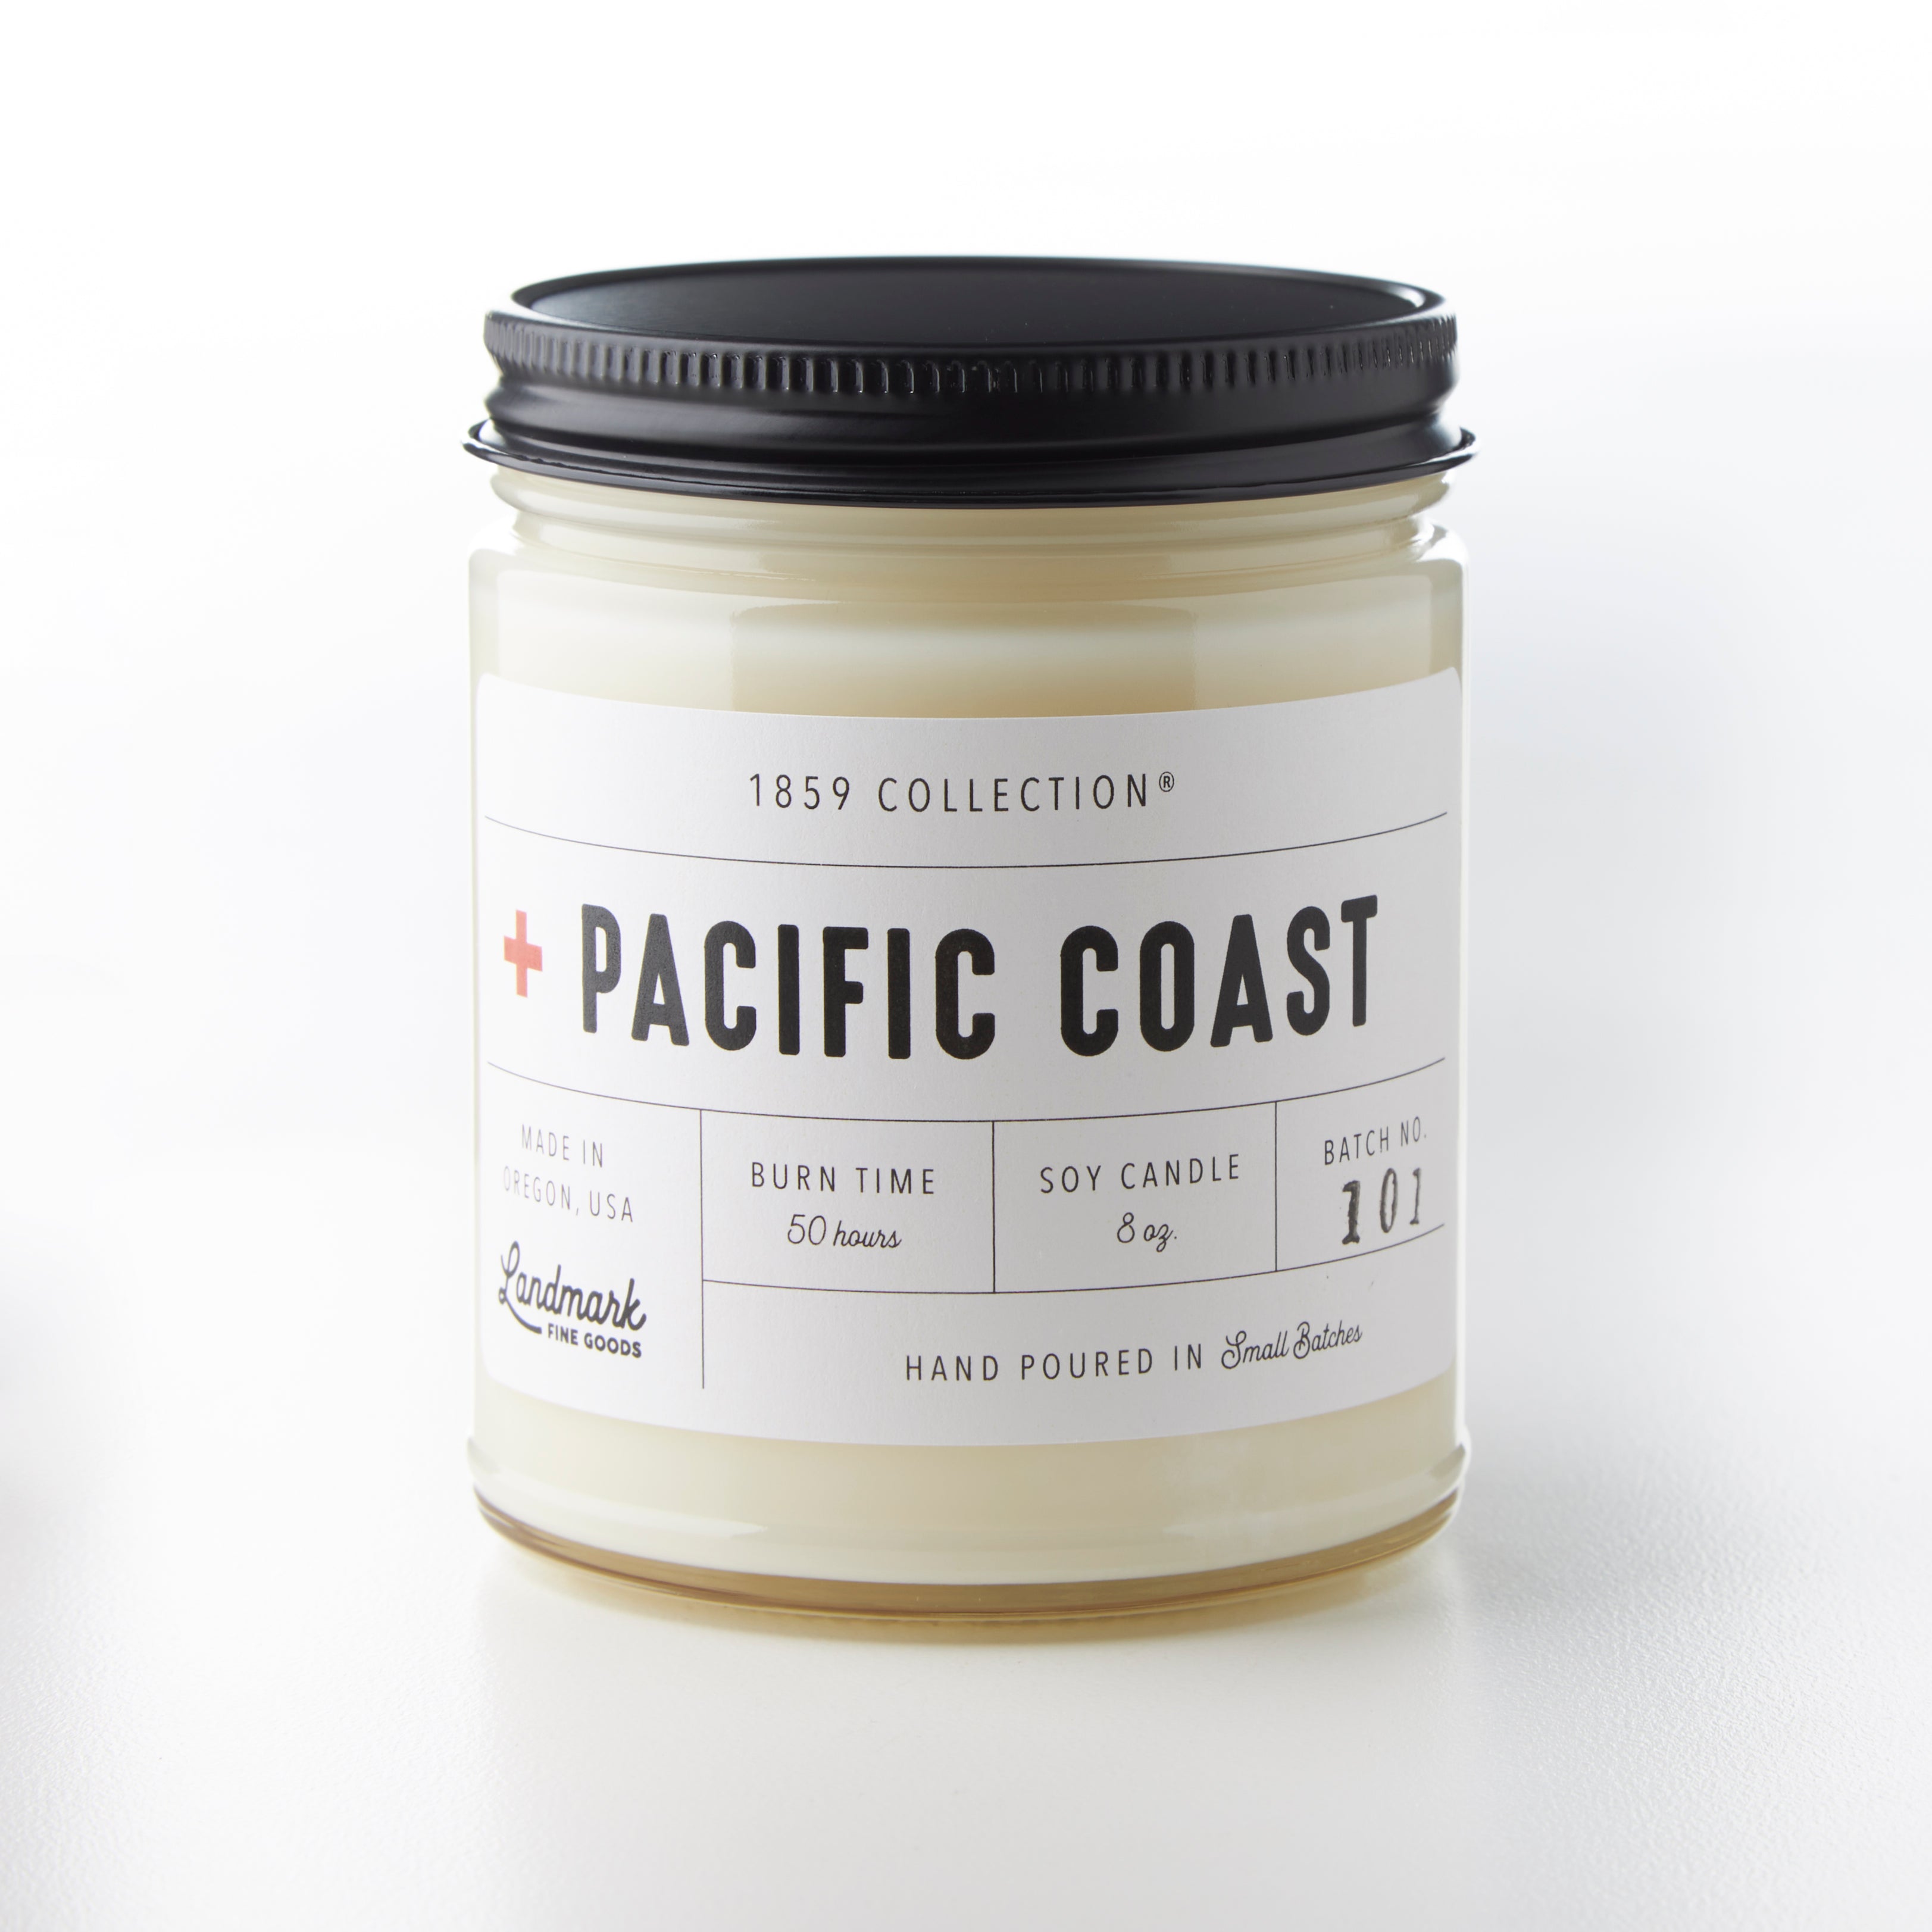 Pacific Coast Candle - 1859 Collection®